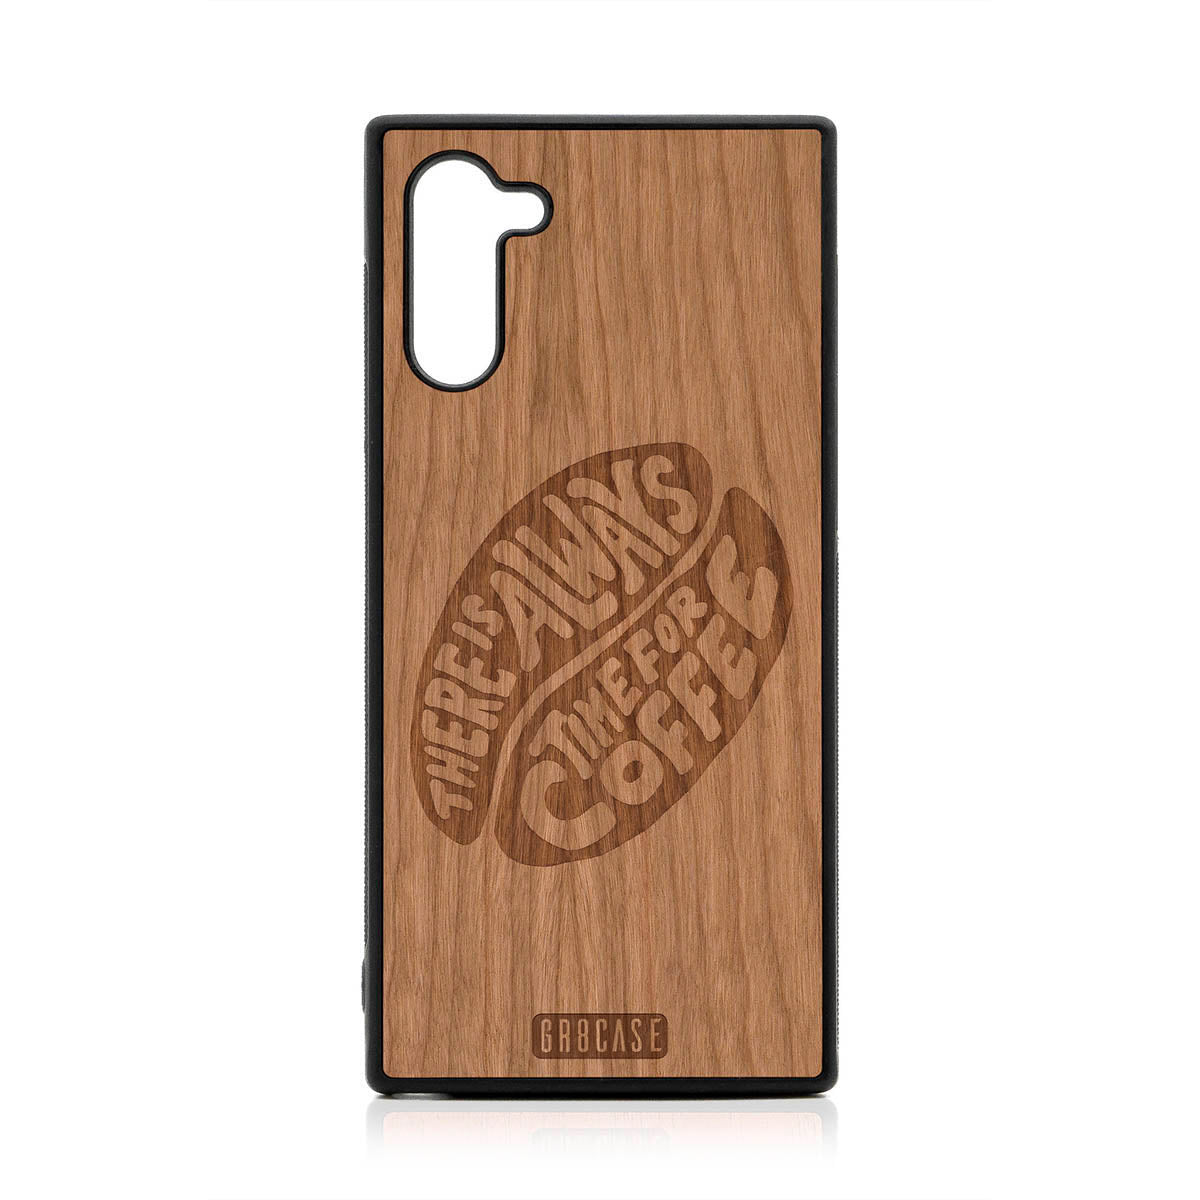 There Is Always Time For Coffee Design Wood Case For Samsung Galaxy Note 10